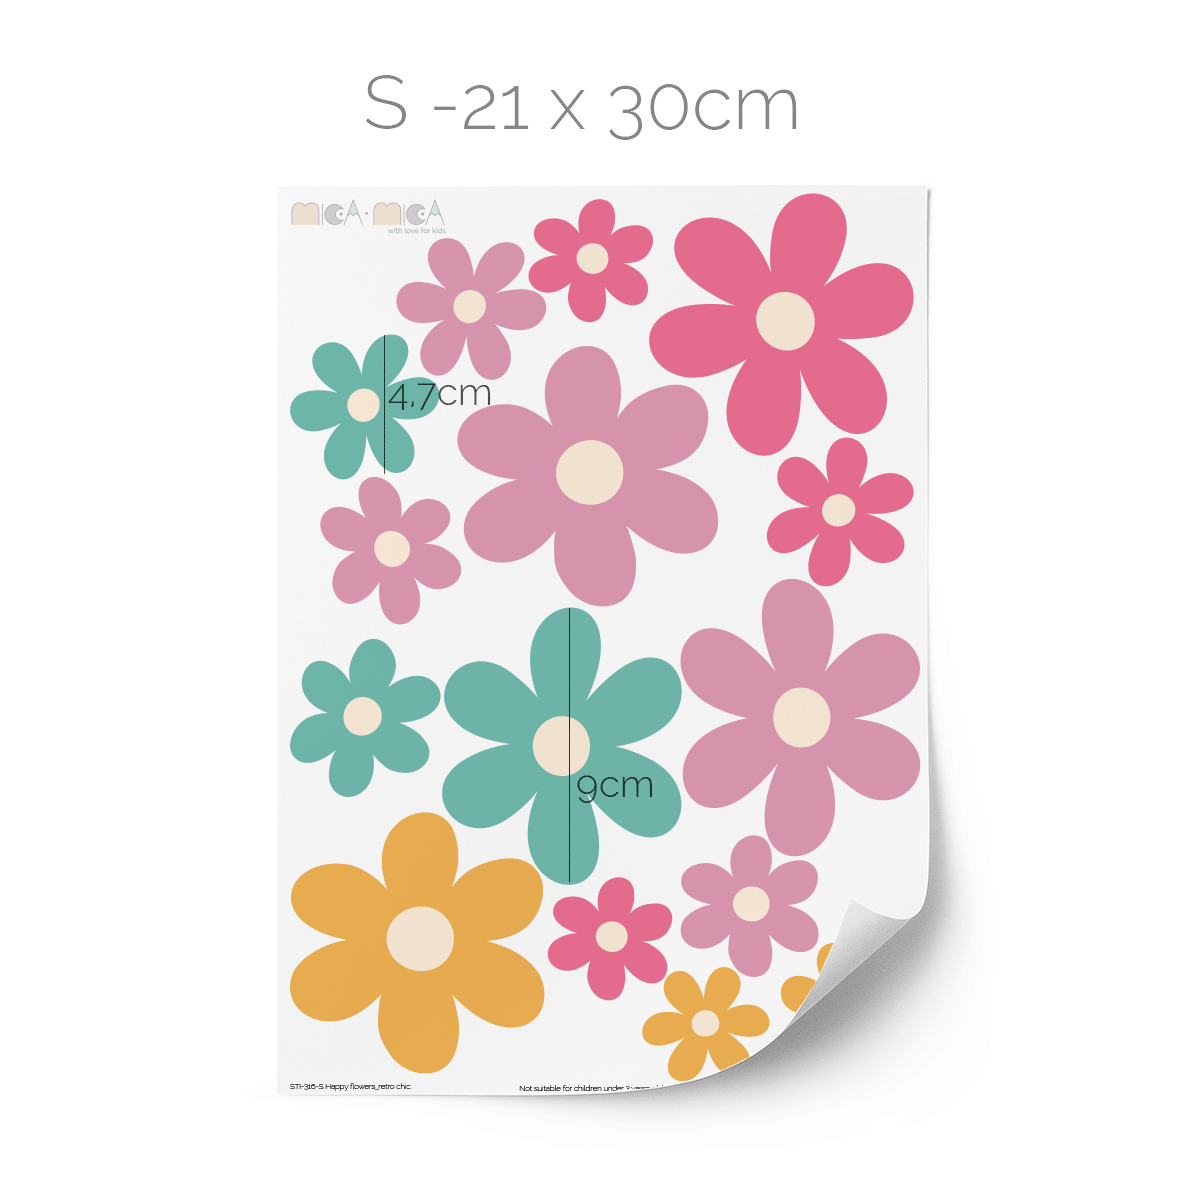 Flower wall stickers - Happy blooms (retro chic)